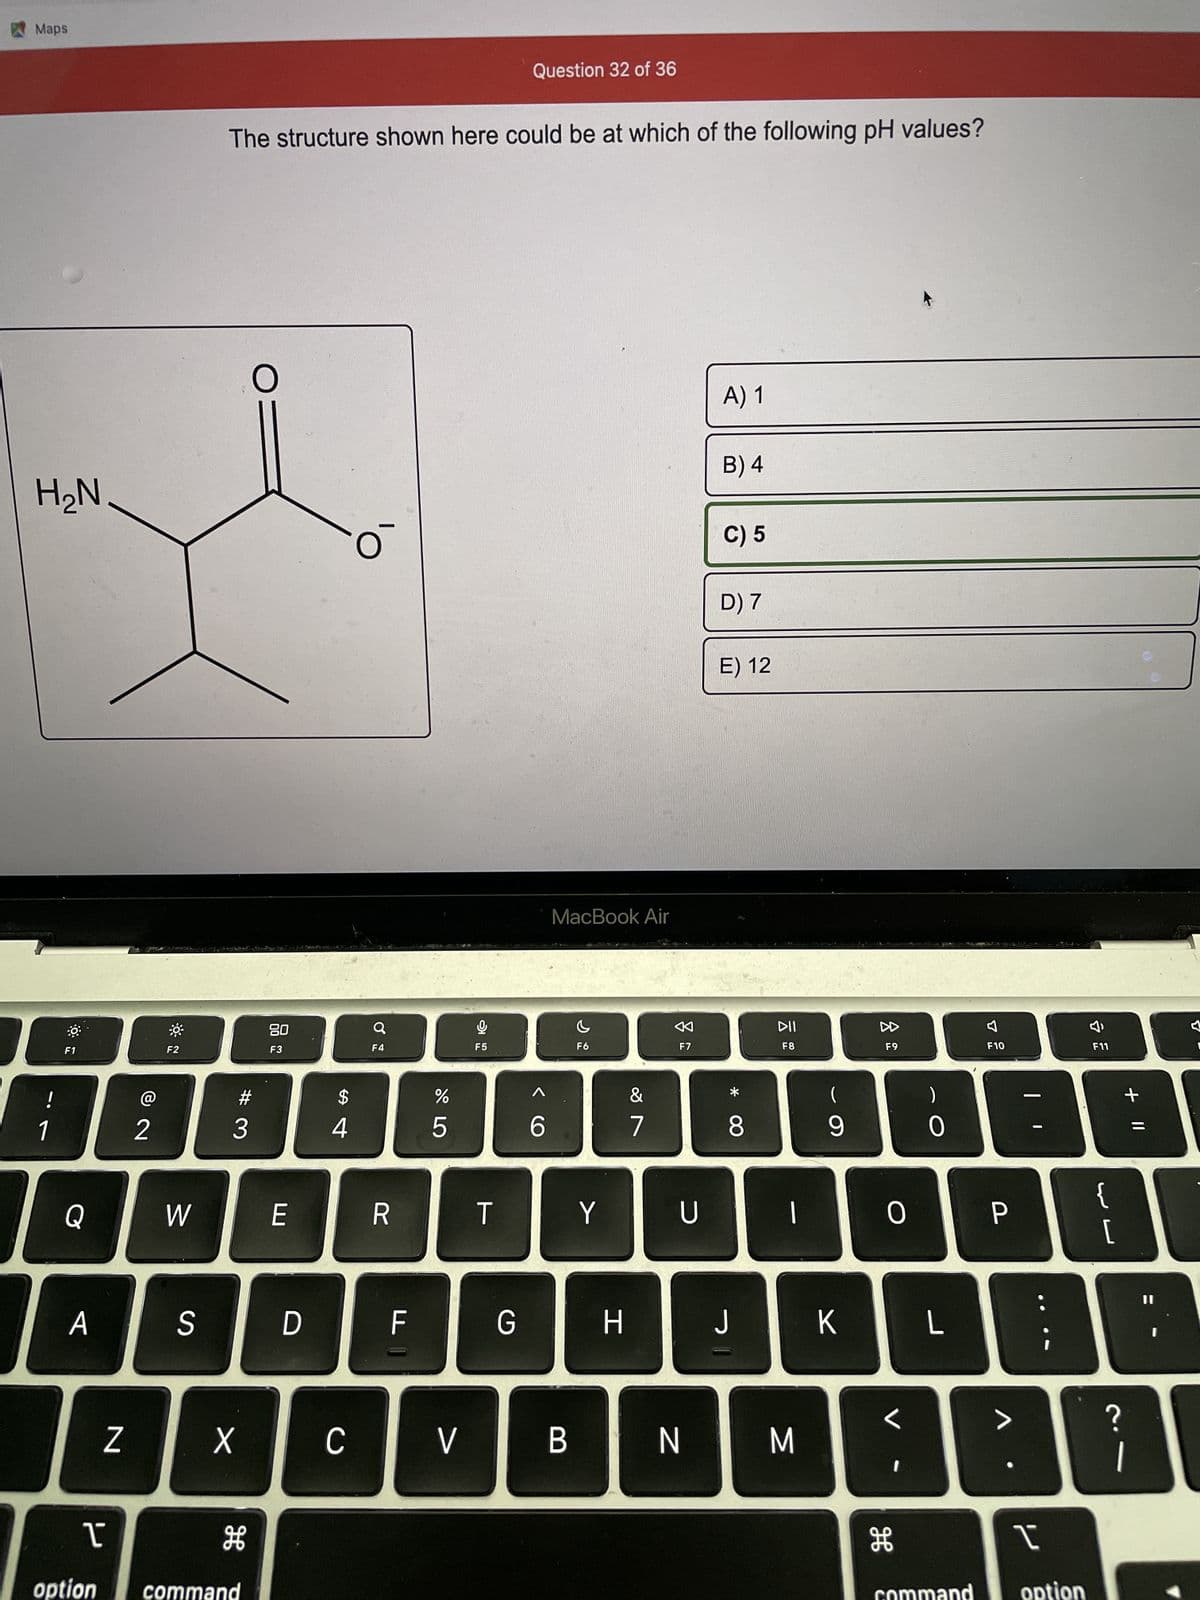 Maps
H₂N
!
1
F1
Q
A
Z
T
option
@
2
F2
W
S
The structure shown here could be at which of the following pH values?
X
H
command
O
#3
80
F3
E
D
$
4
C
O
F4
R
F
15
%
L
V
9
F5
T
Question 32 of 36
G
6
I
MacBook Air
B
C
F6
Y
H
&
7
F7
U
N
A) 1
B) 4
C) 5
D) 7
E) 12
*
8
J
DII
F8
|
M
(
9
K
8
F9
0
H
0
L
F10
P
>
I
command option
F
F11
{
[
+ 11
?
[